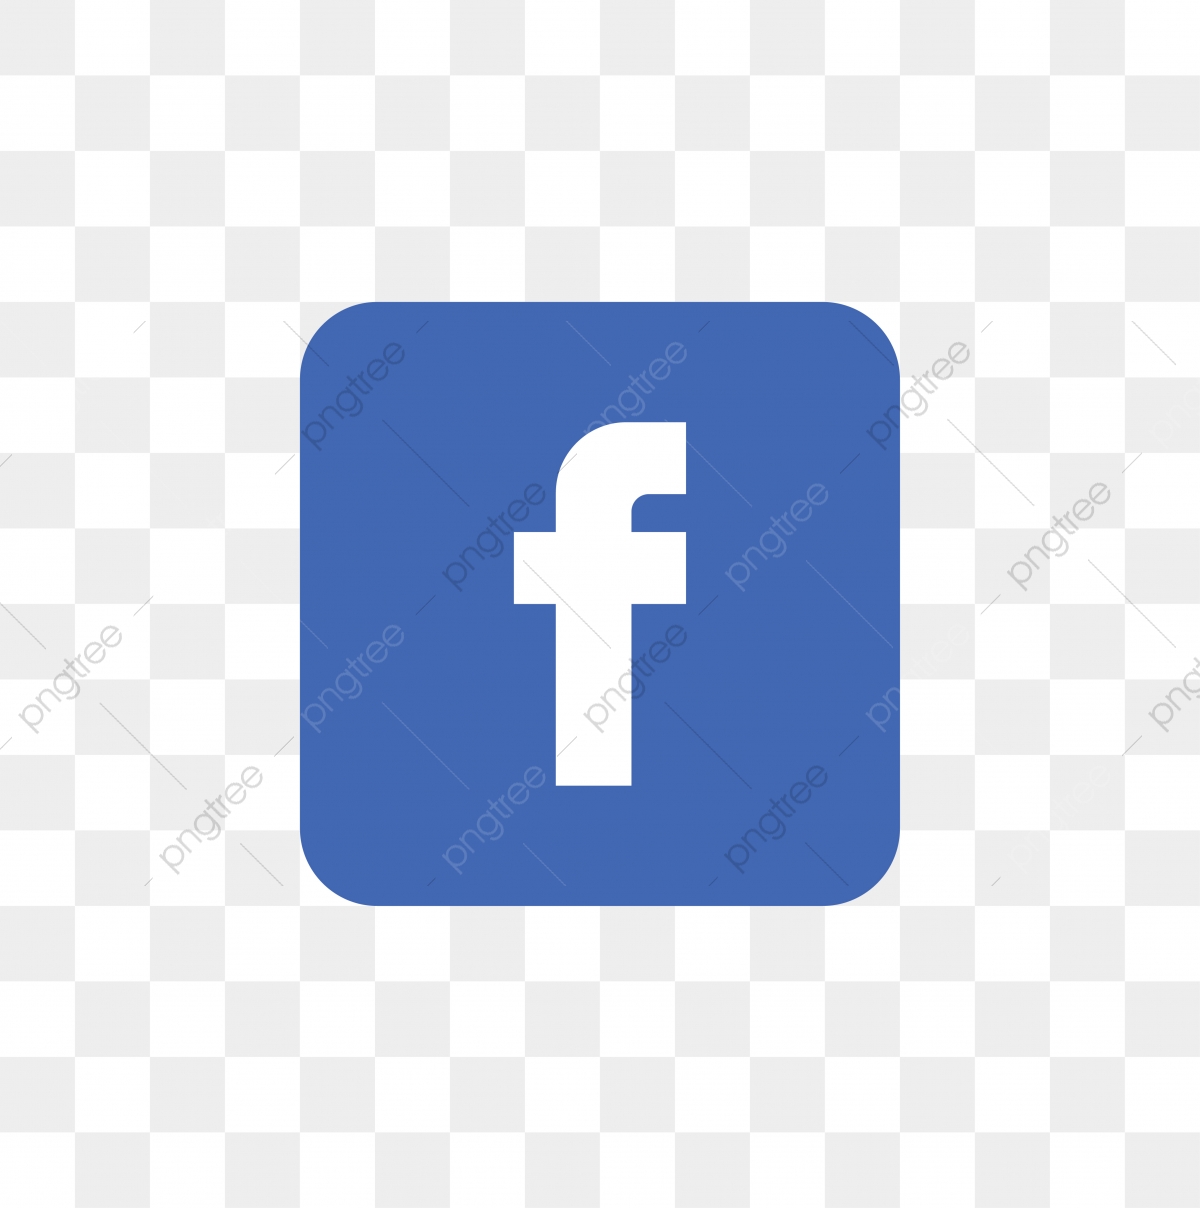 Facebook Logo Vector Free Download At Vectorified Com Collection Of Facebook Logo Vector Free Download Free For Personal Use